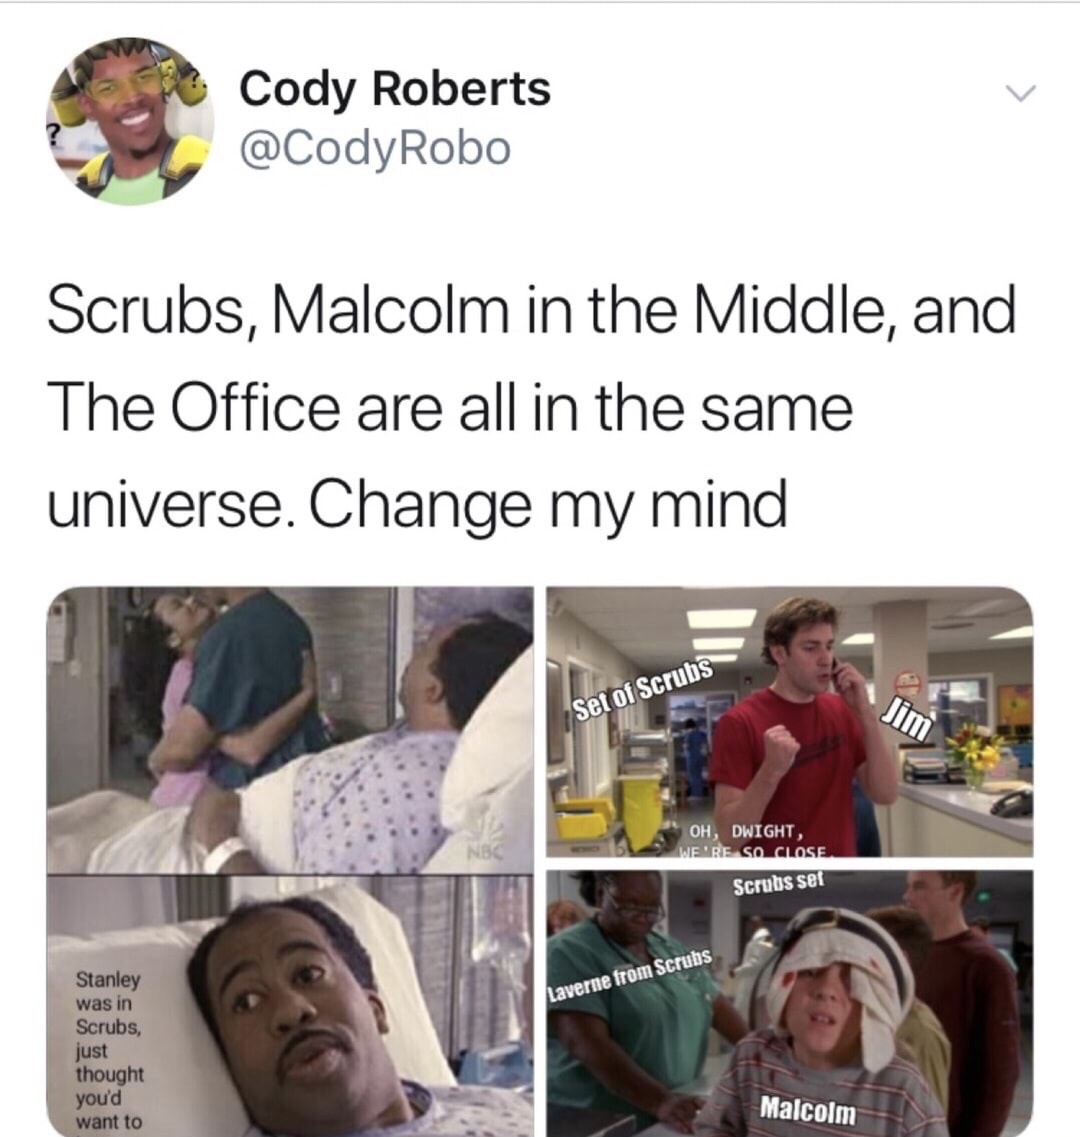 memes - malcolm in the middle endgame meme - Cody Roberts Scrubs, Malcolm in the Middle, and The Office are all in the same universe. Change my mind Set of Scrubs Oh, Dwight, We'Re So Close Scrubs set Laverne from Scrubs Stanley was in Scrubs, just though